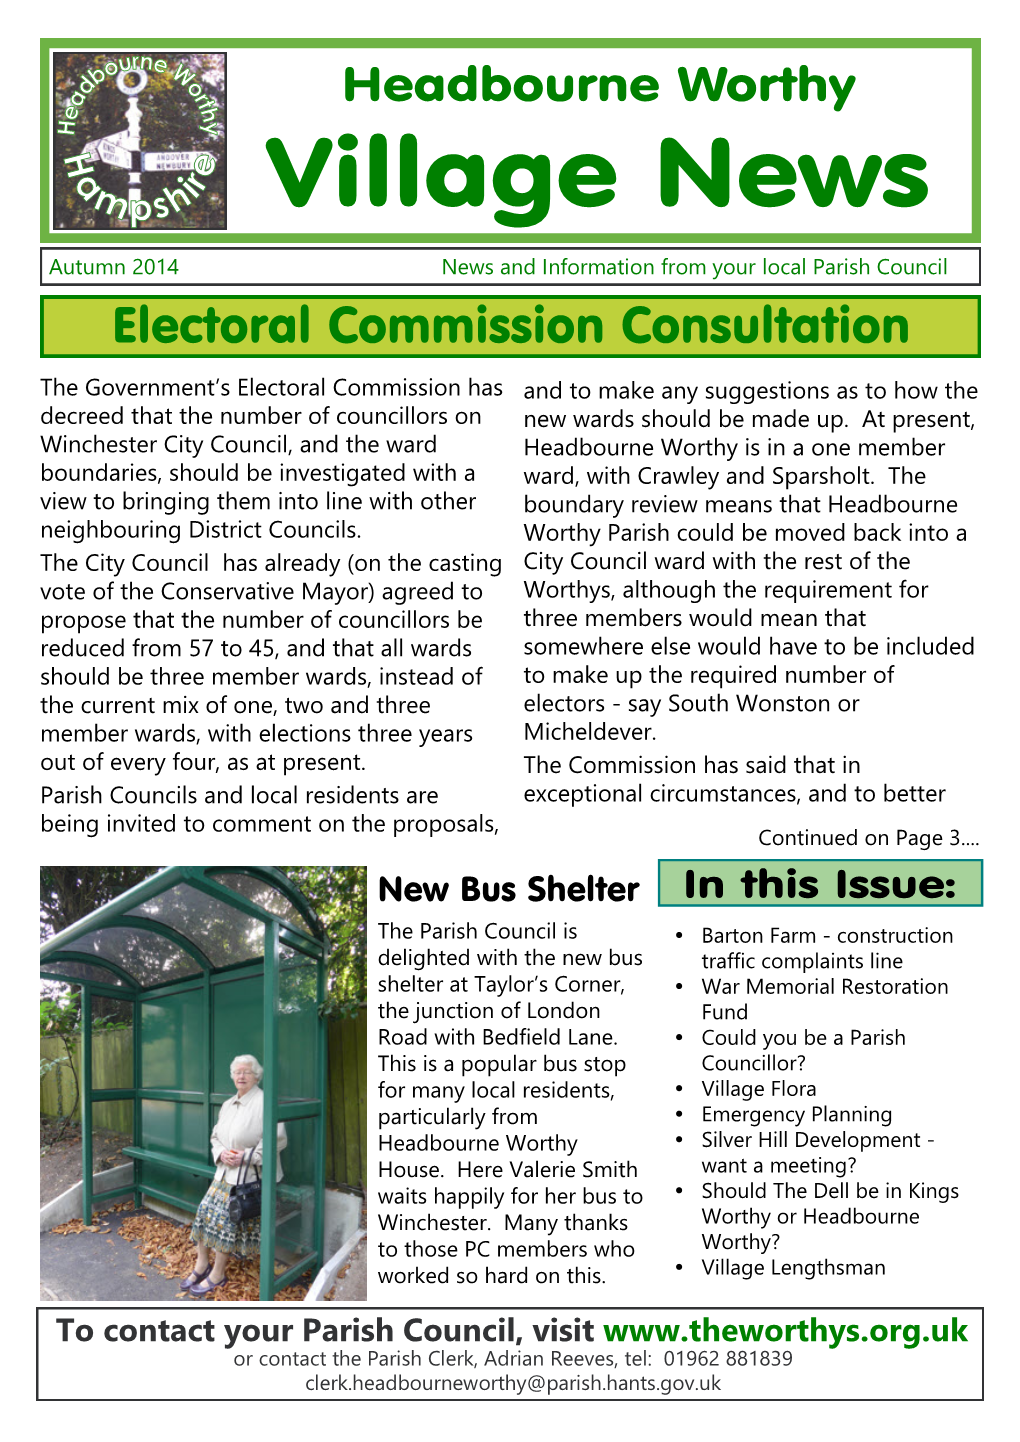 Village News Electoral Commission Special 2014